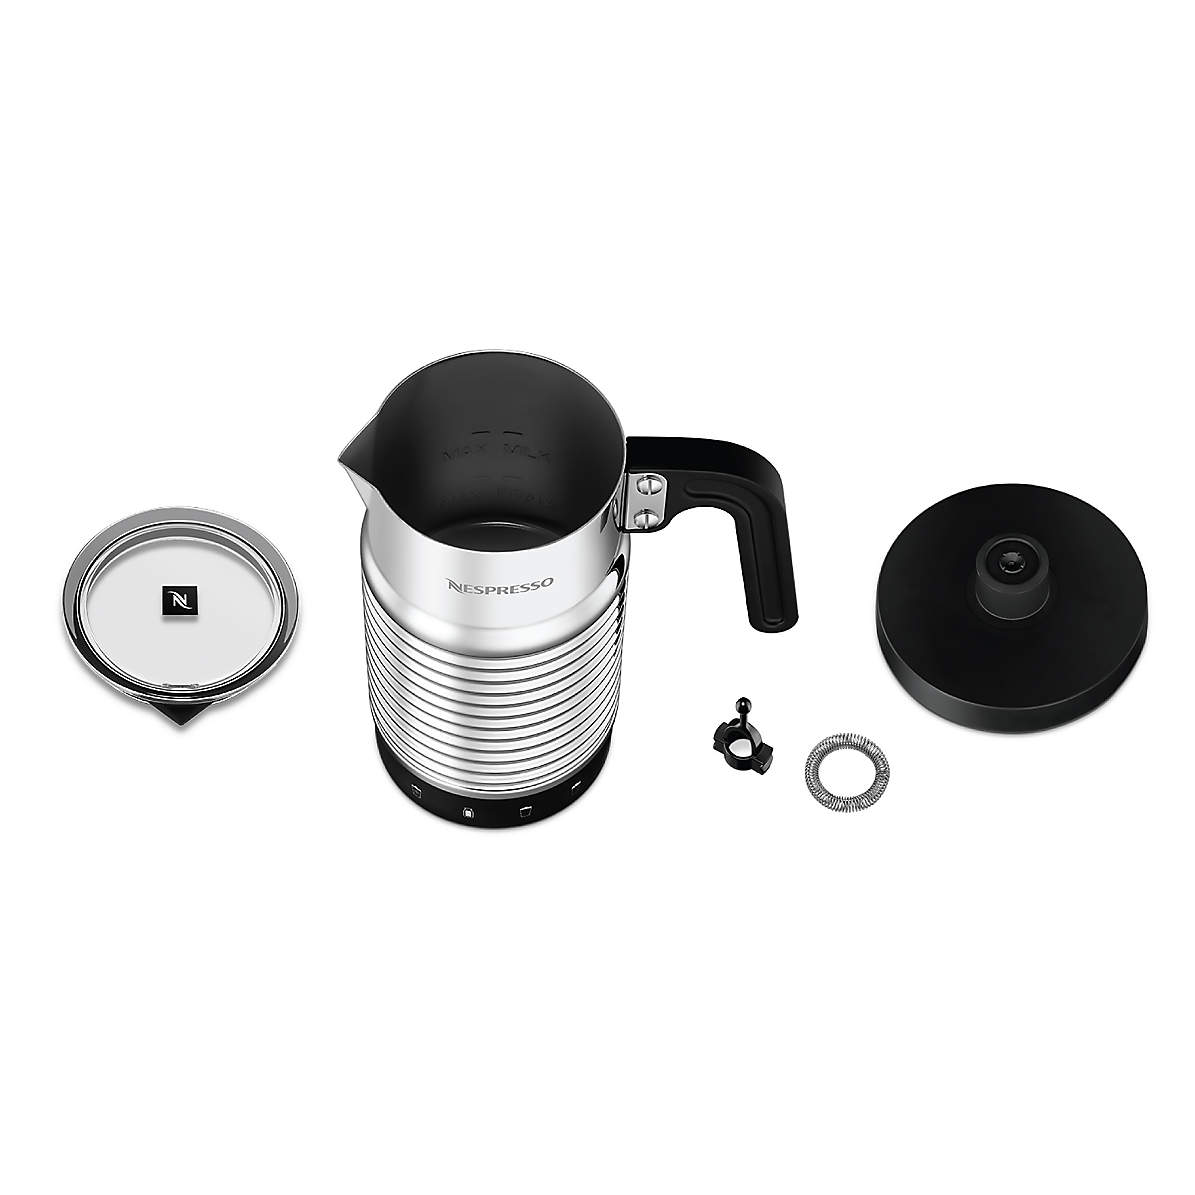 New and used Nespresso Milk Frothers for sale